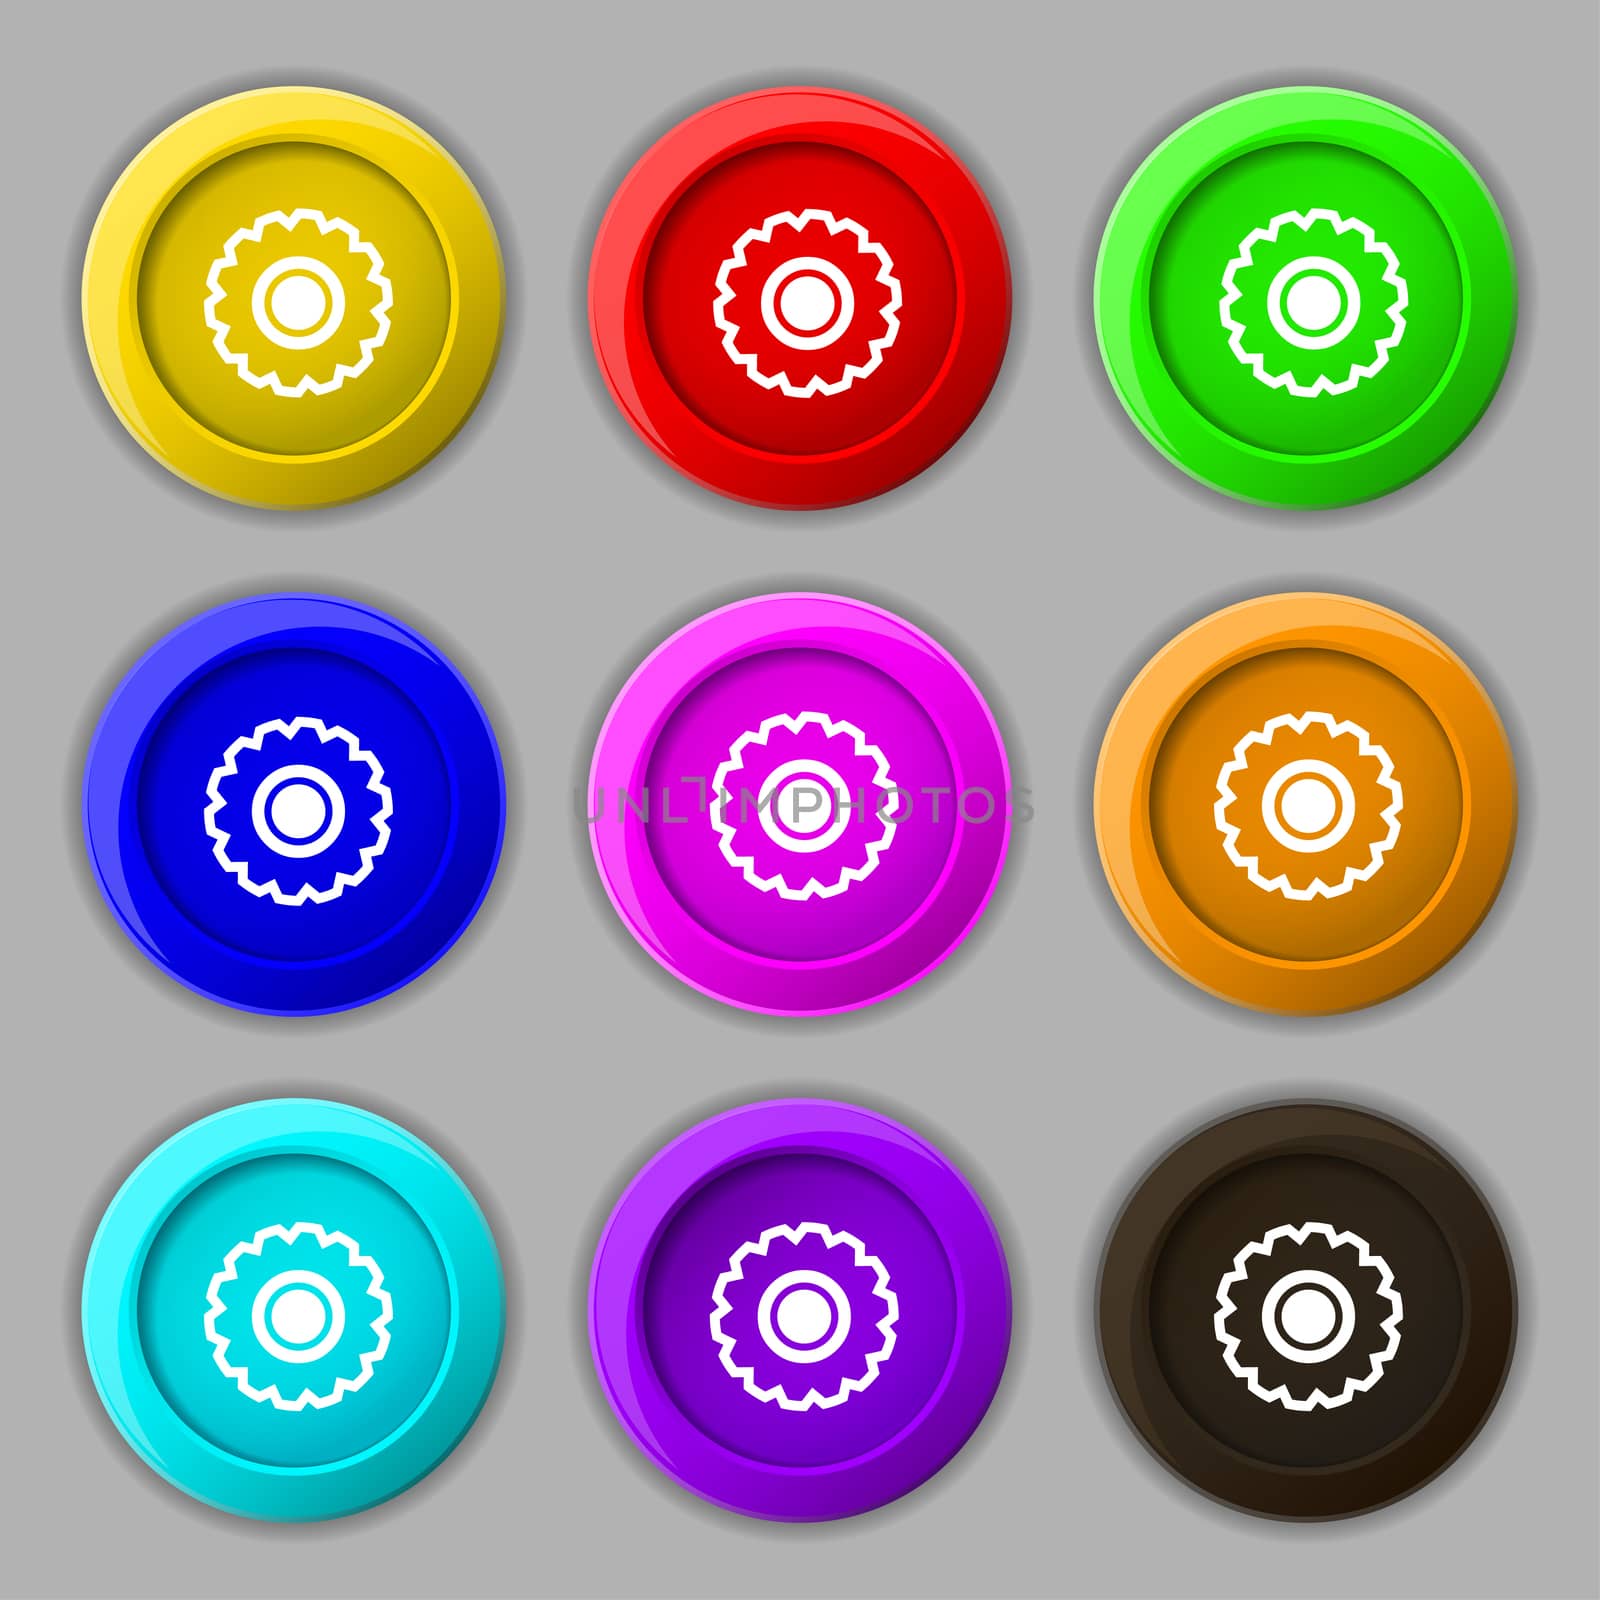  sign. symbol on nine round colourful buttons. illustration